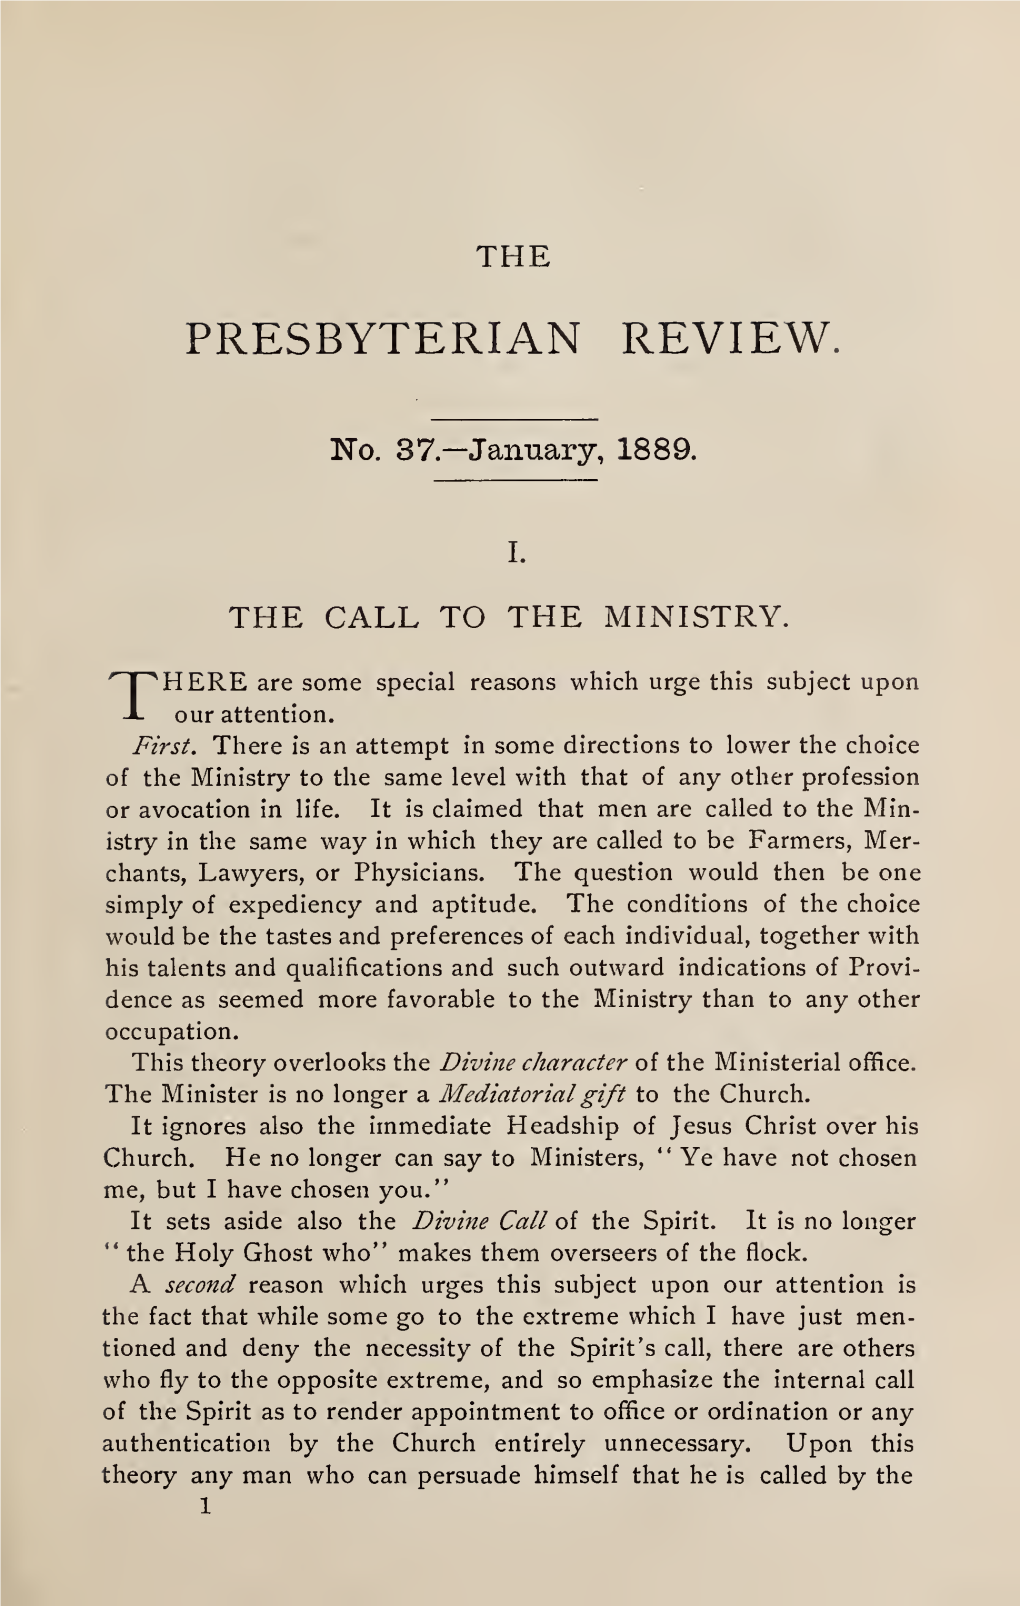 The New Creed of the Presbyterian Church of England